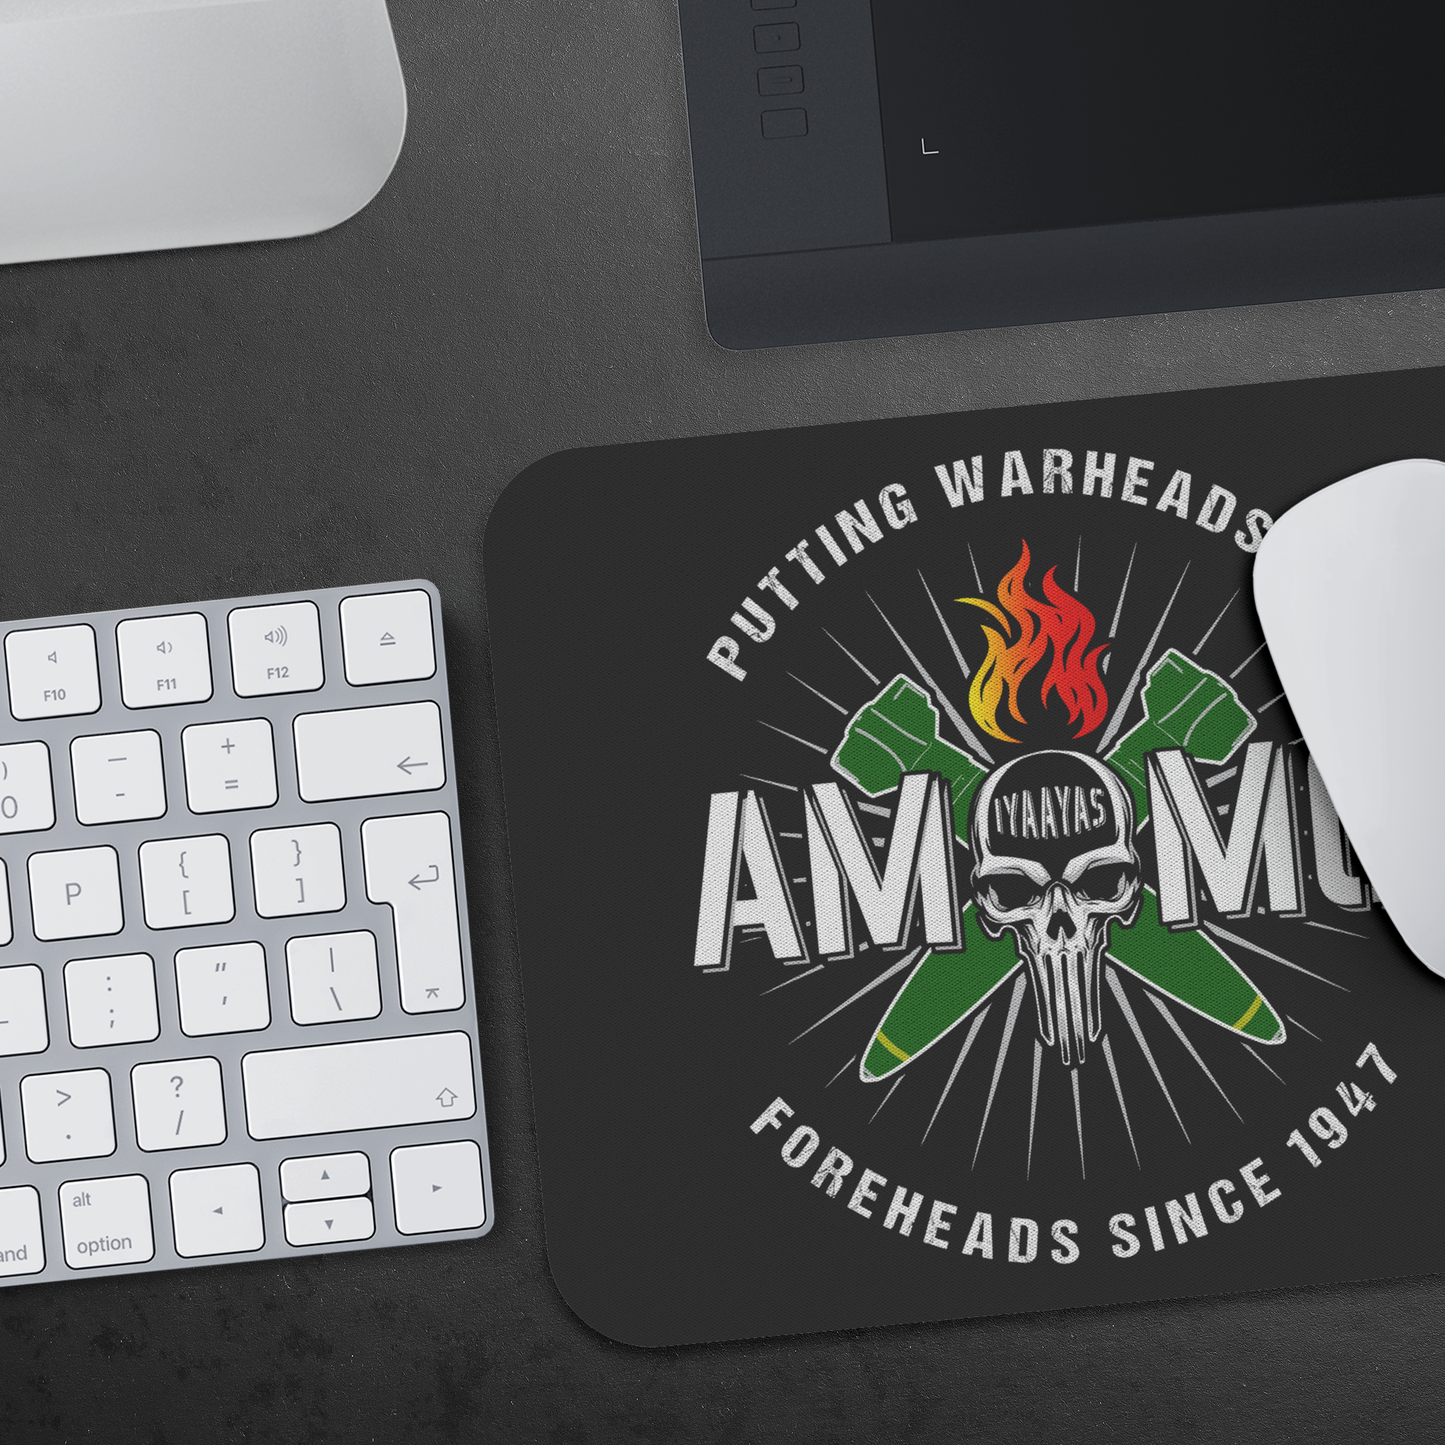 USAF AMMO Putting Warheads On Foreheads Since 1947 Mousepad